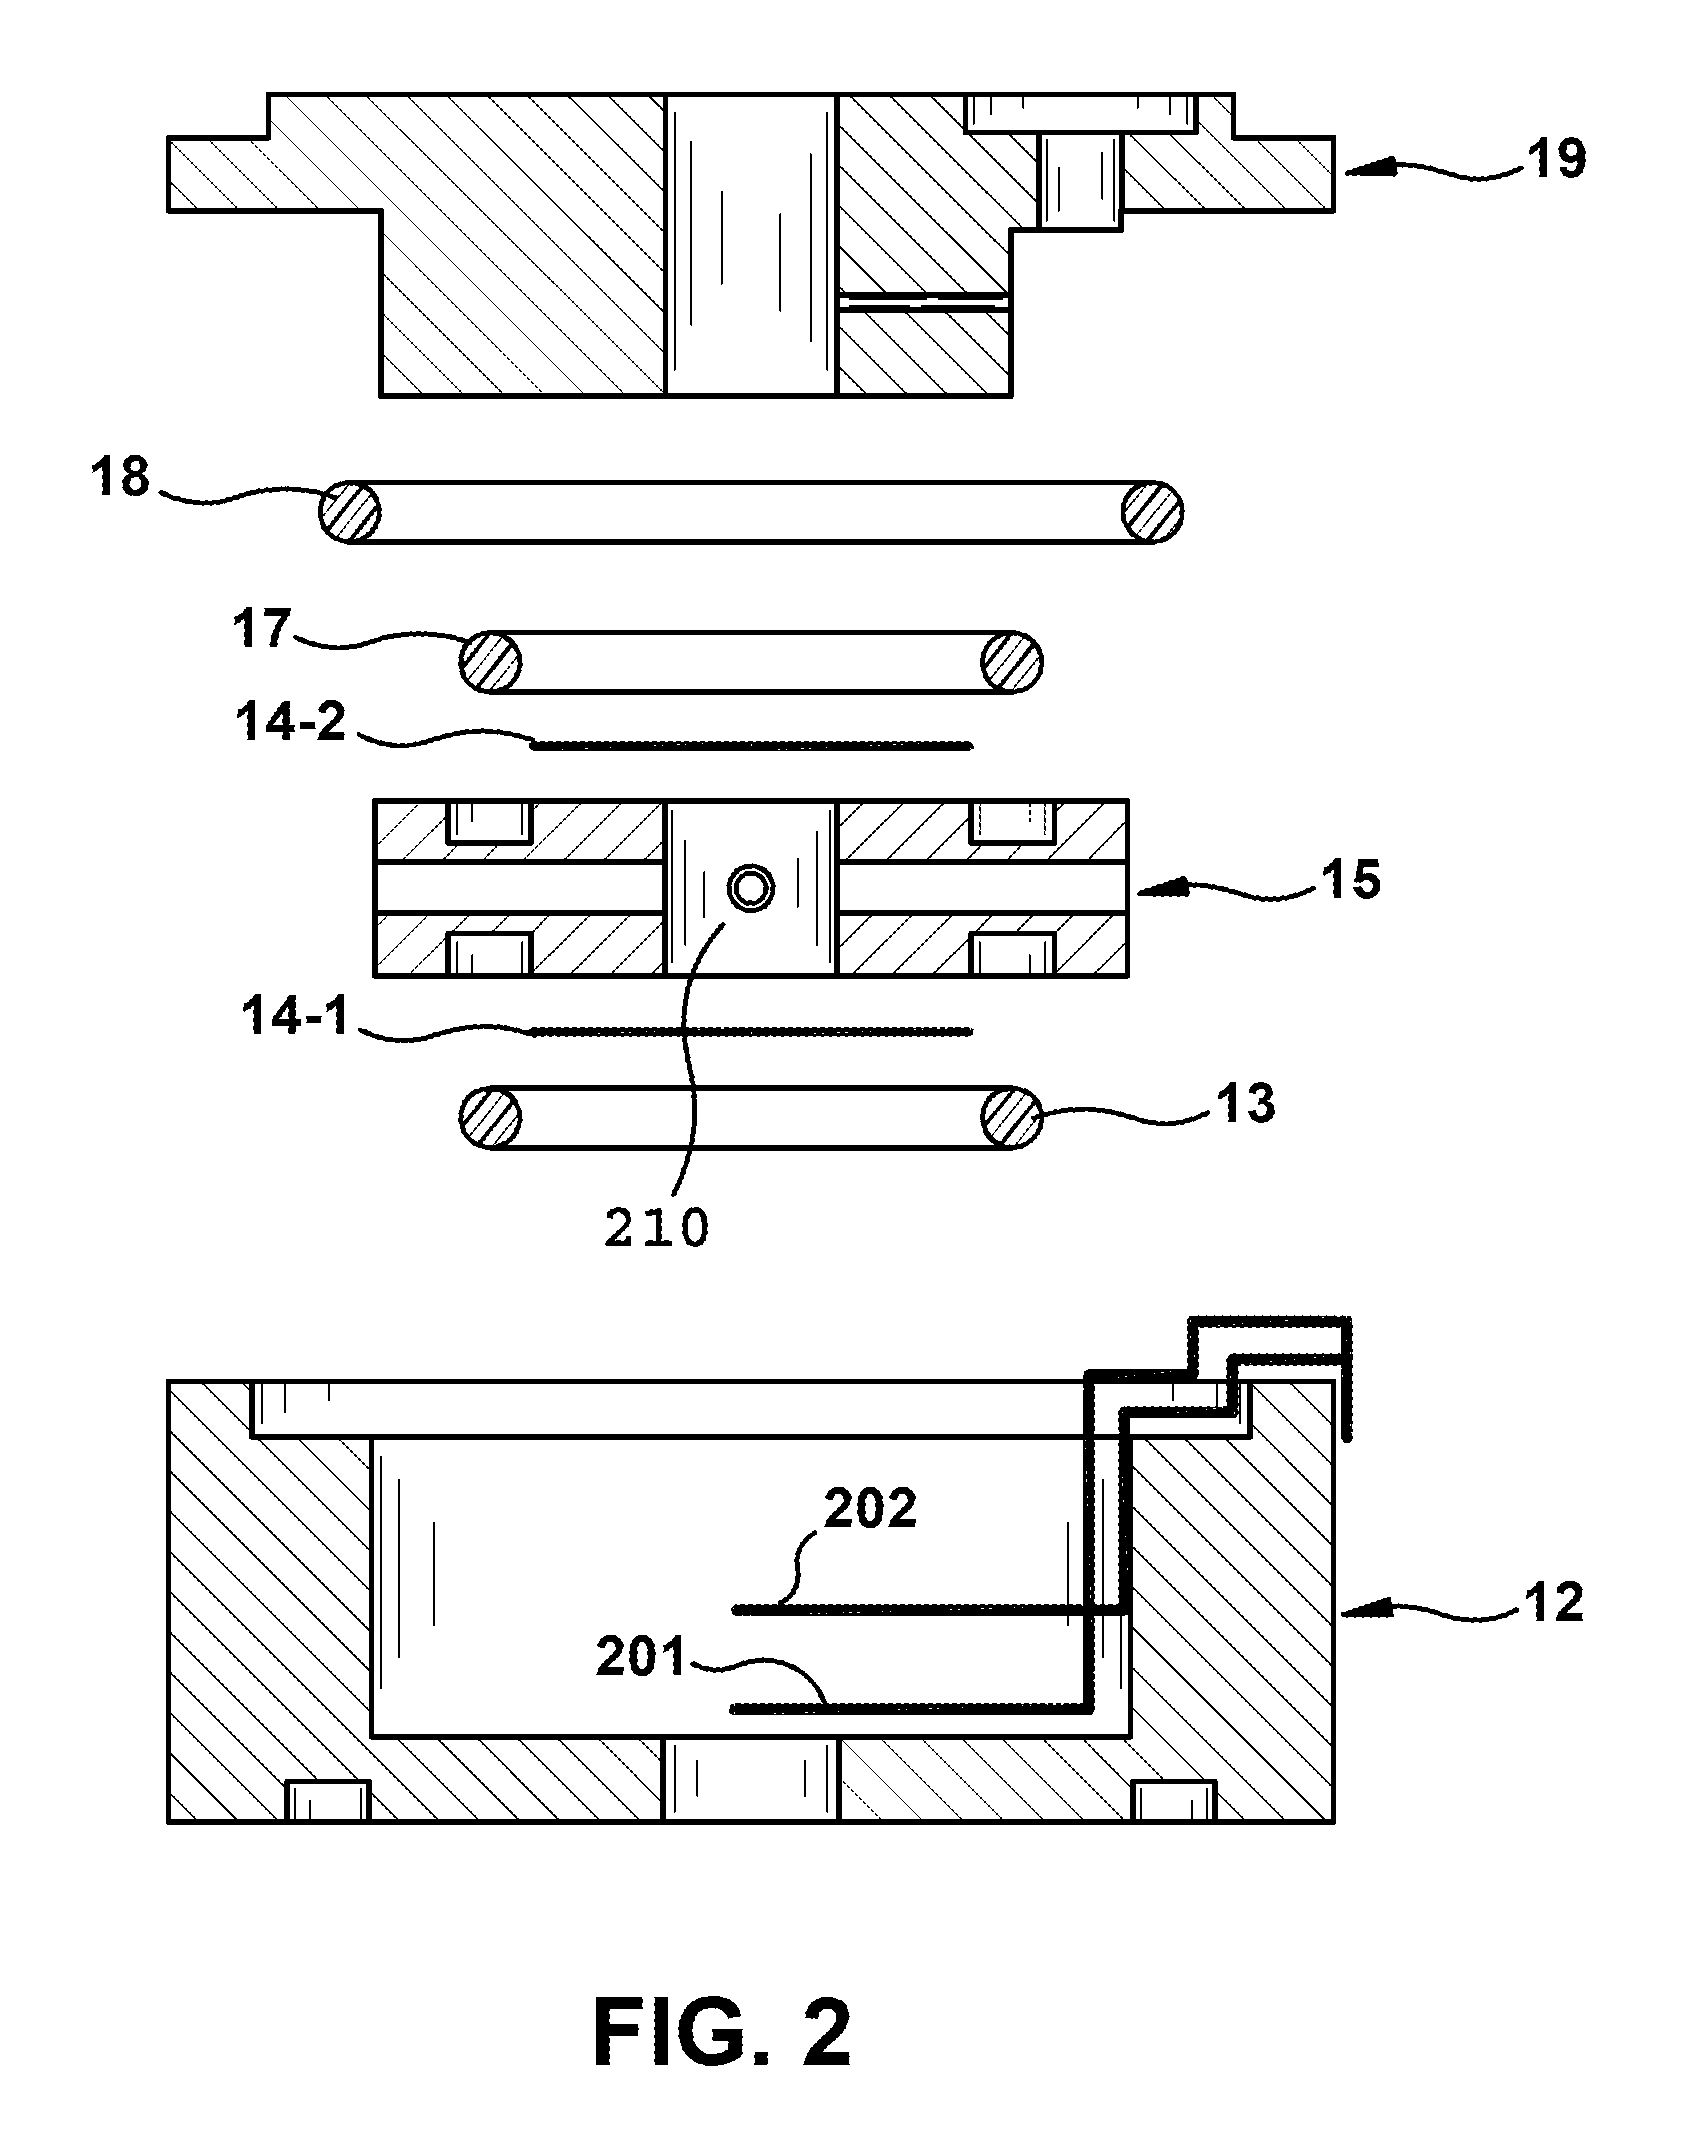 Sensor apparatus for measuring and detecting acetylene and hydrogen dissolved in a fluid